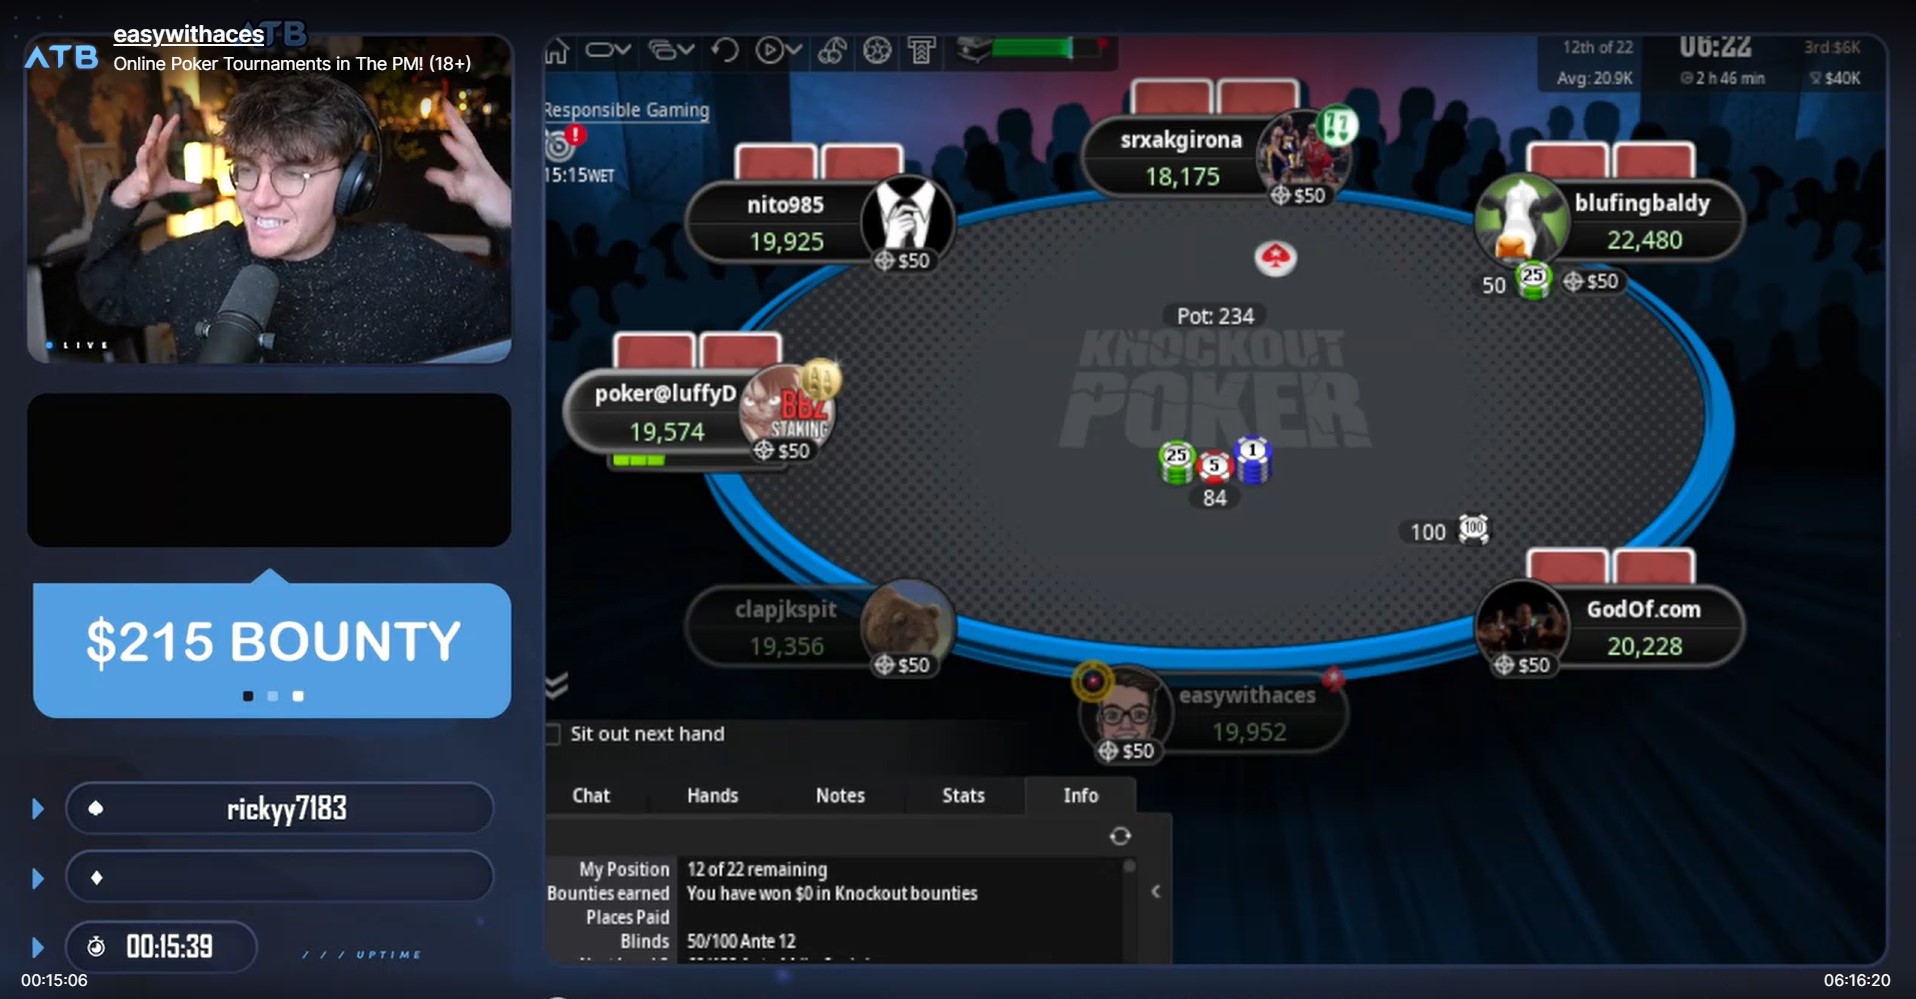 The Stream Team Episode 1: Fintan Hand on How Streaming Can Open Doors in Poker